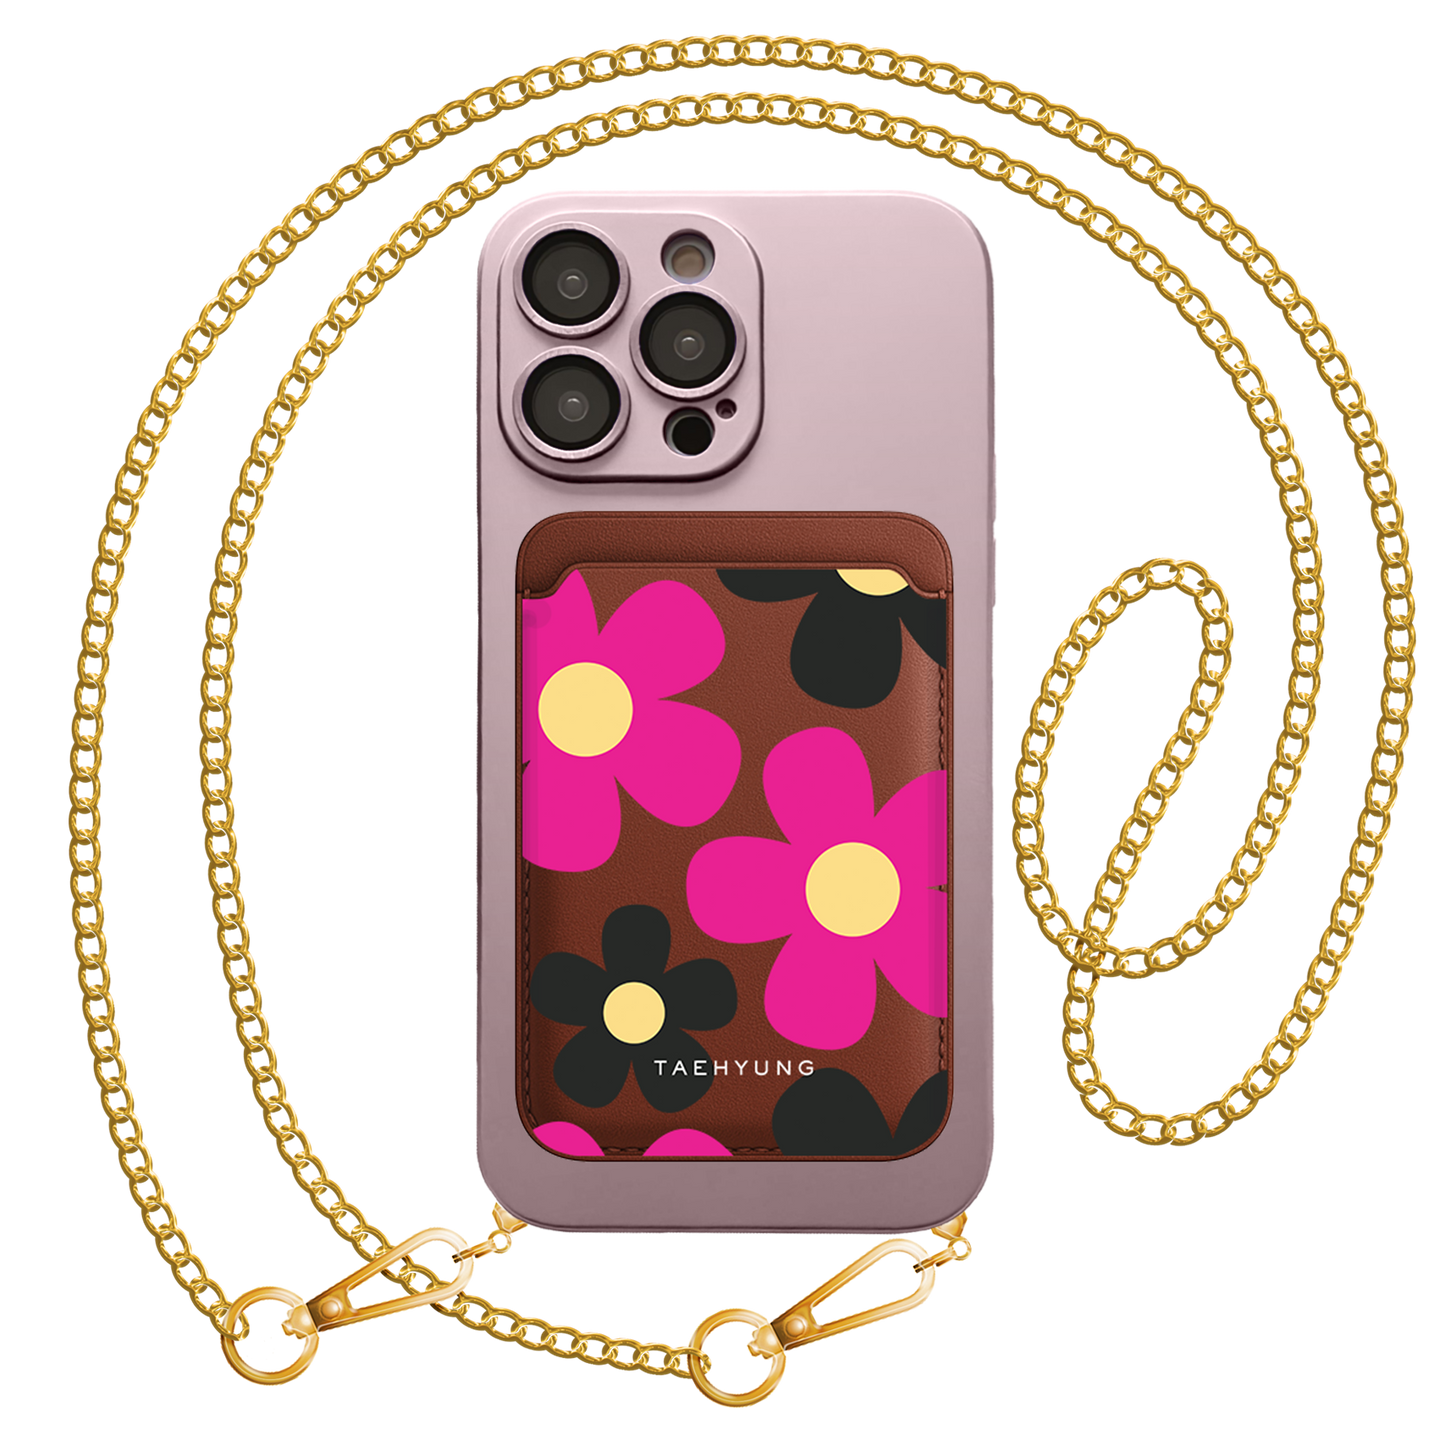 iPhone Magnetic Wallet Silicone Case - Daisy Hot Pink